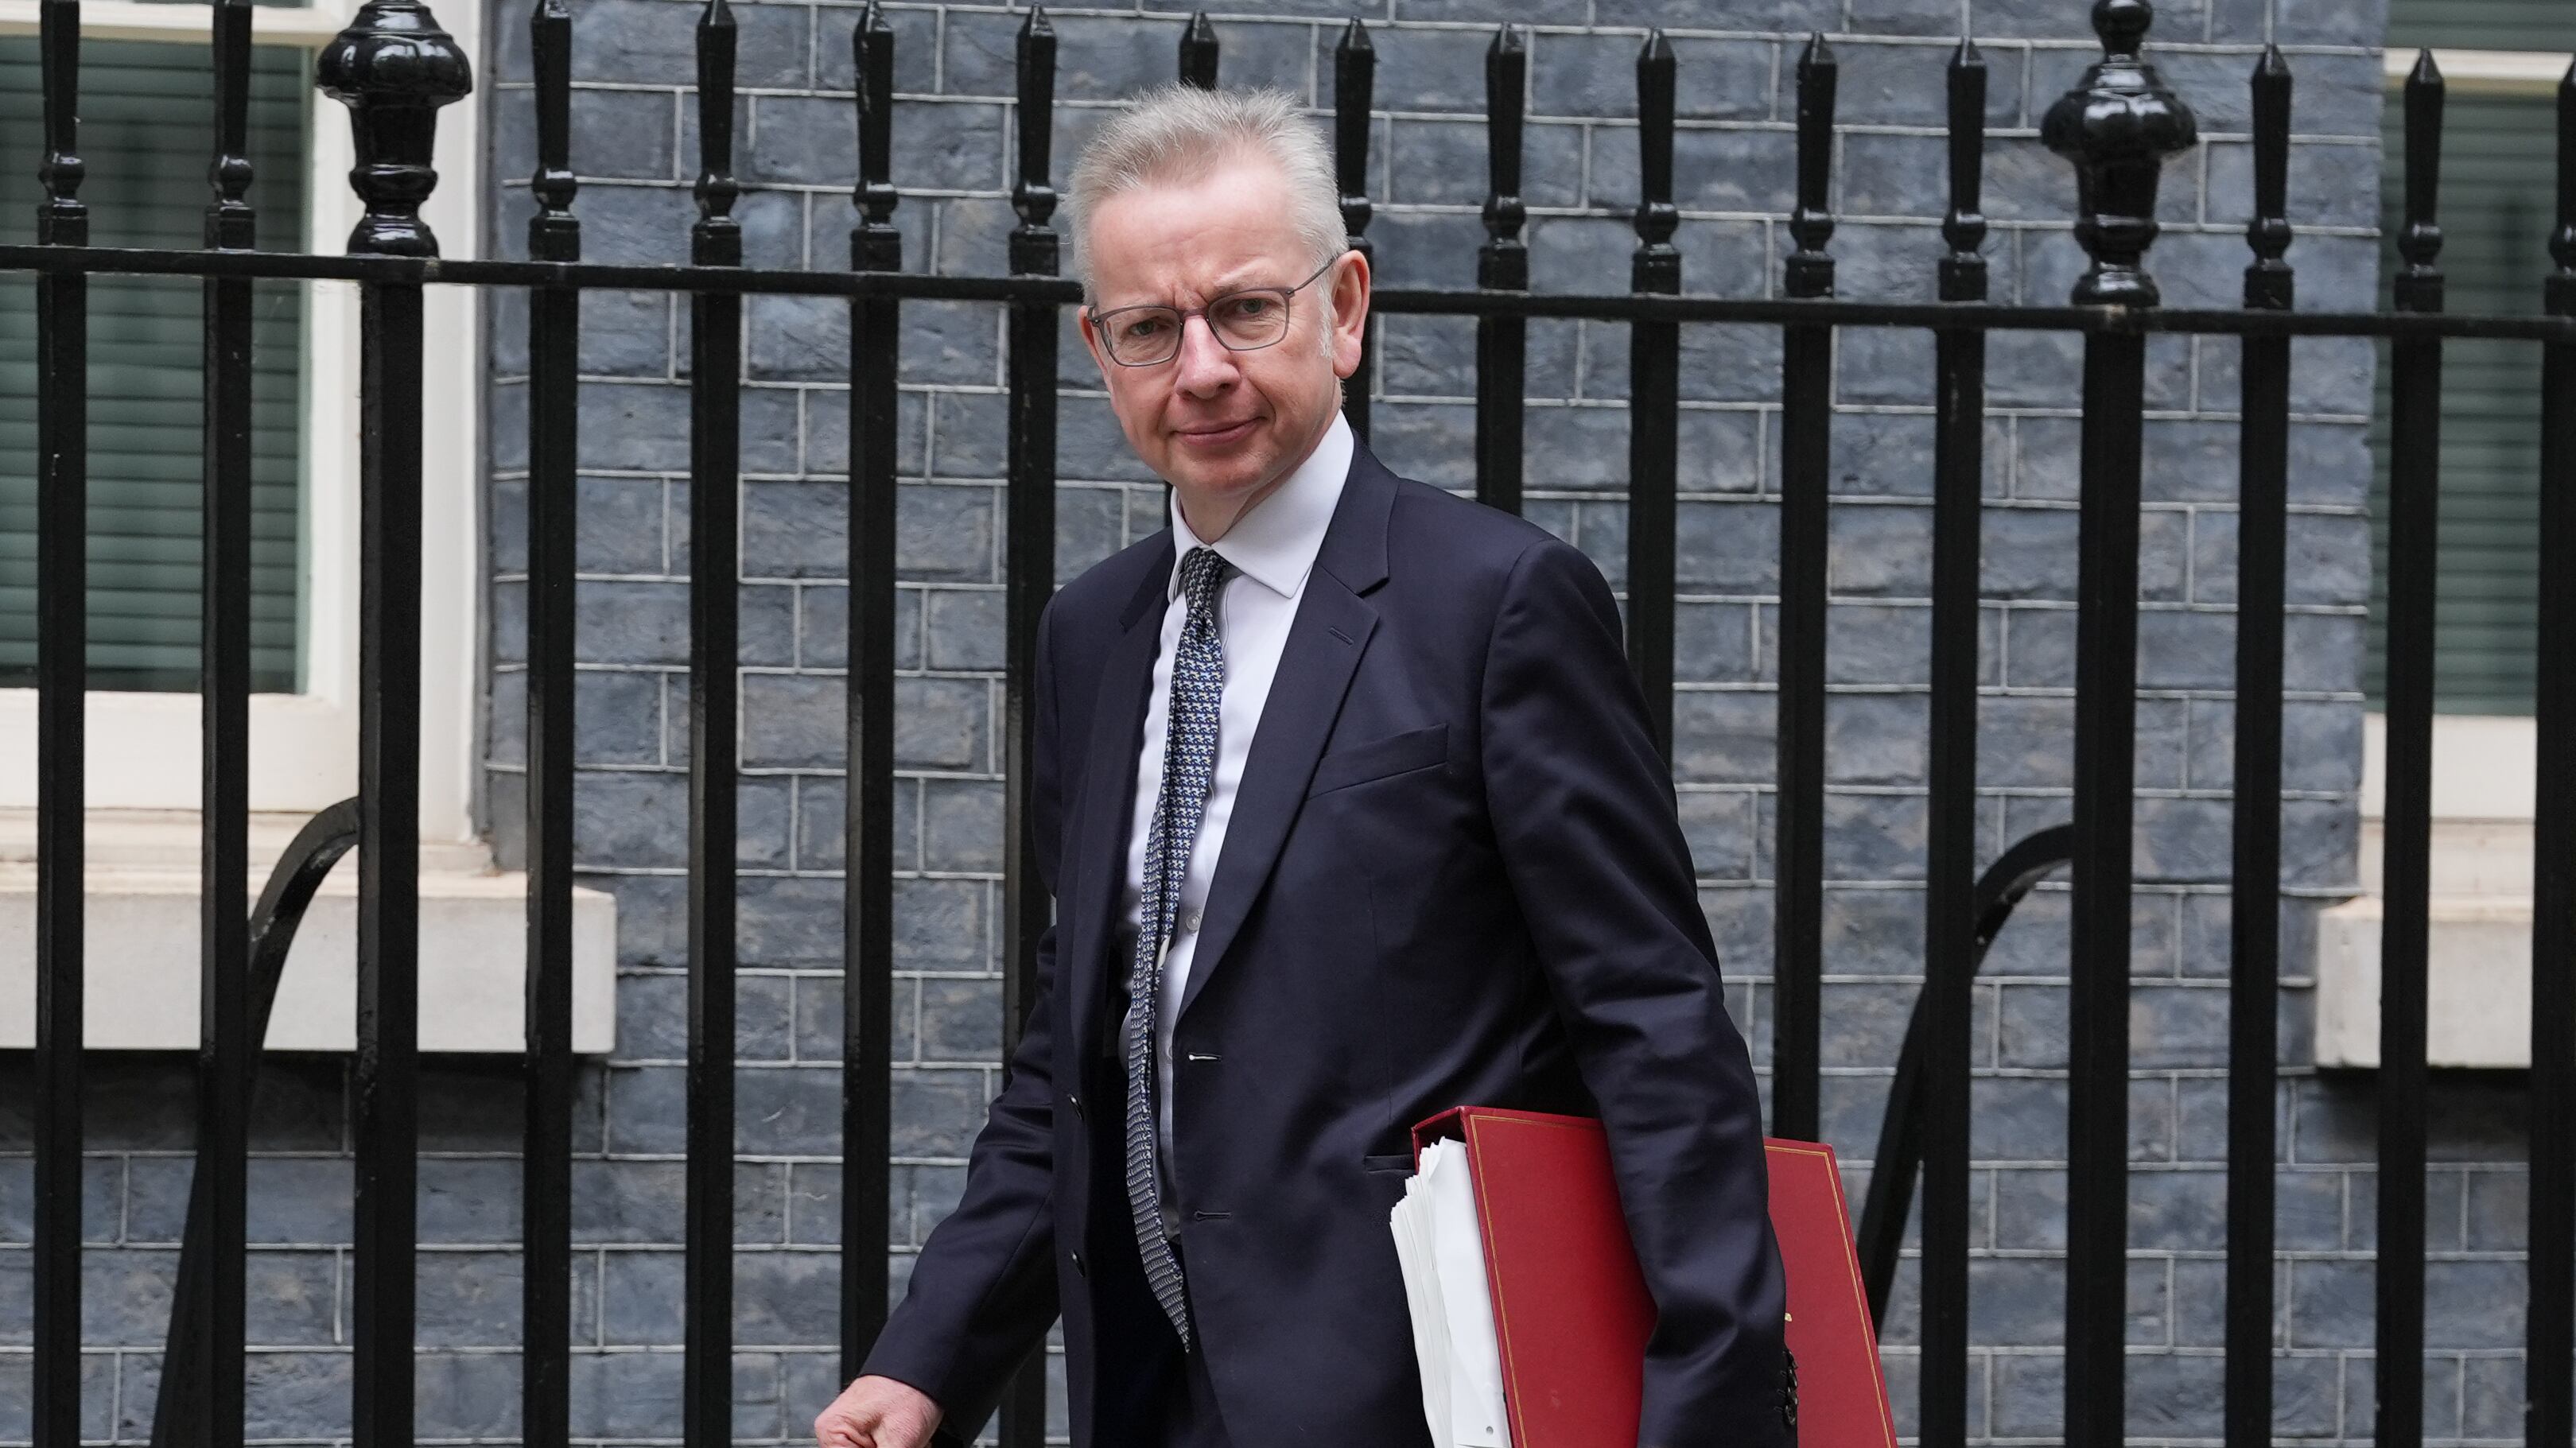 Michael Gove will not stand at the upcoming General Election